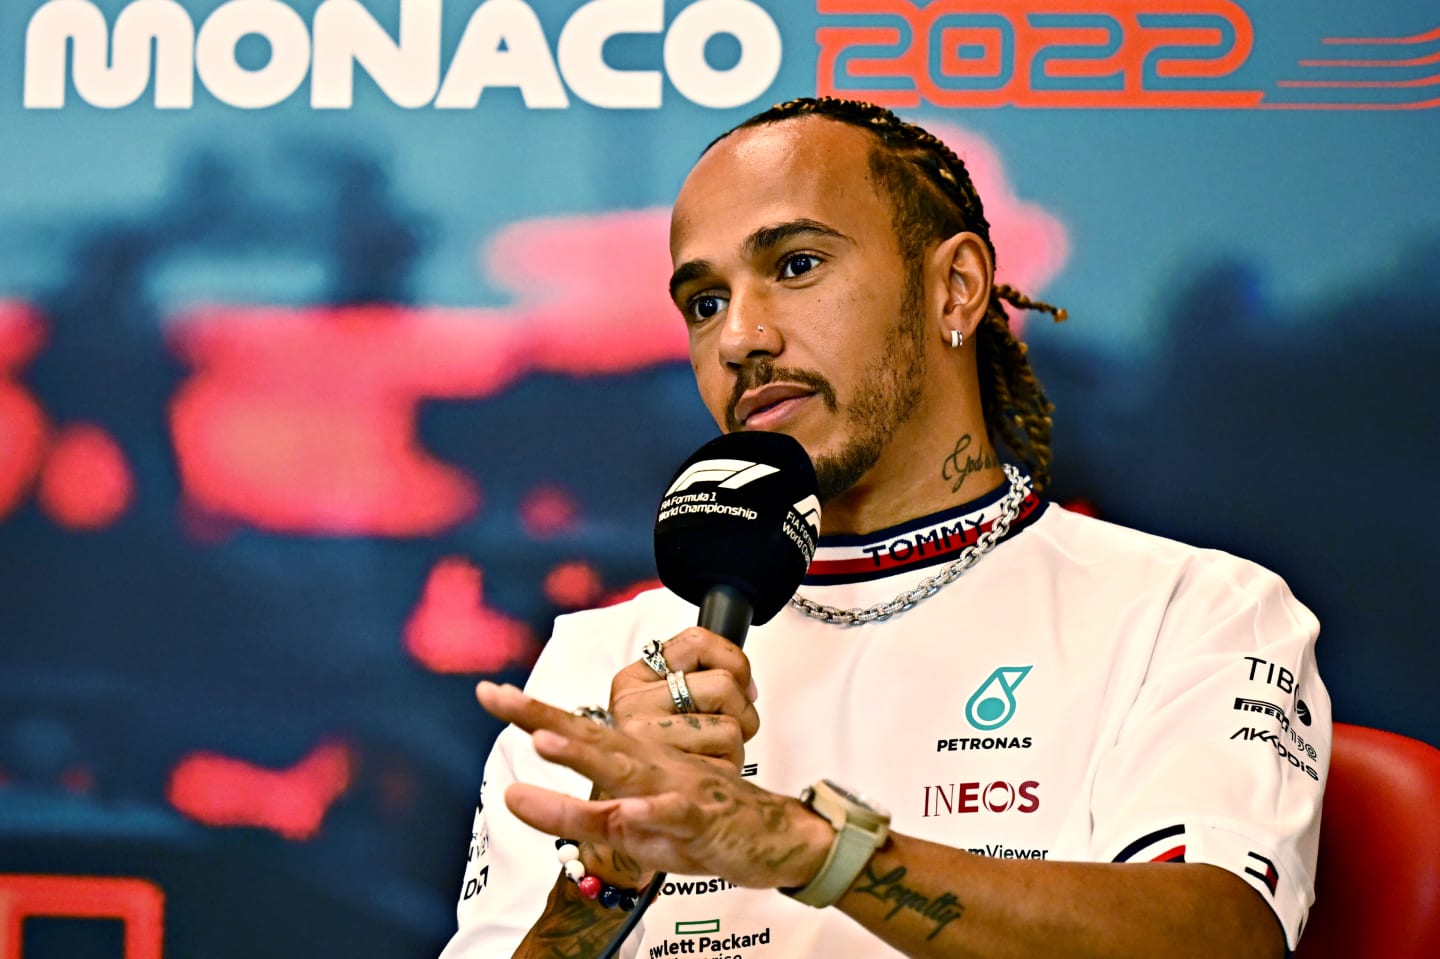 MONTE-CARLO, MONACO - MAY 27: Lewis Hamilton of Great Britain and Mercedes talks in the Drivers Press Conference prior to practice ahead of the F1 Grand Prix of Monaco at Circuit de Monaco on May 27, 2022 in Monte-Carlo, Monaco. (Photo by Clive Mason/Getty Images)